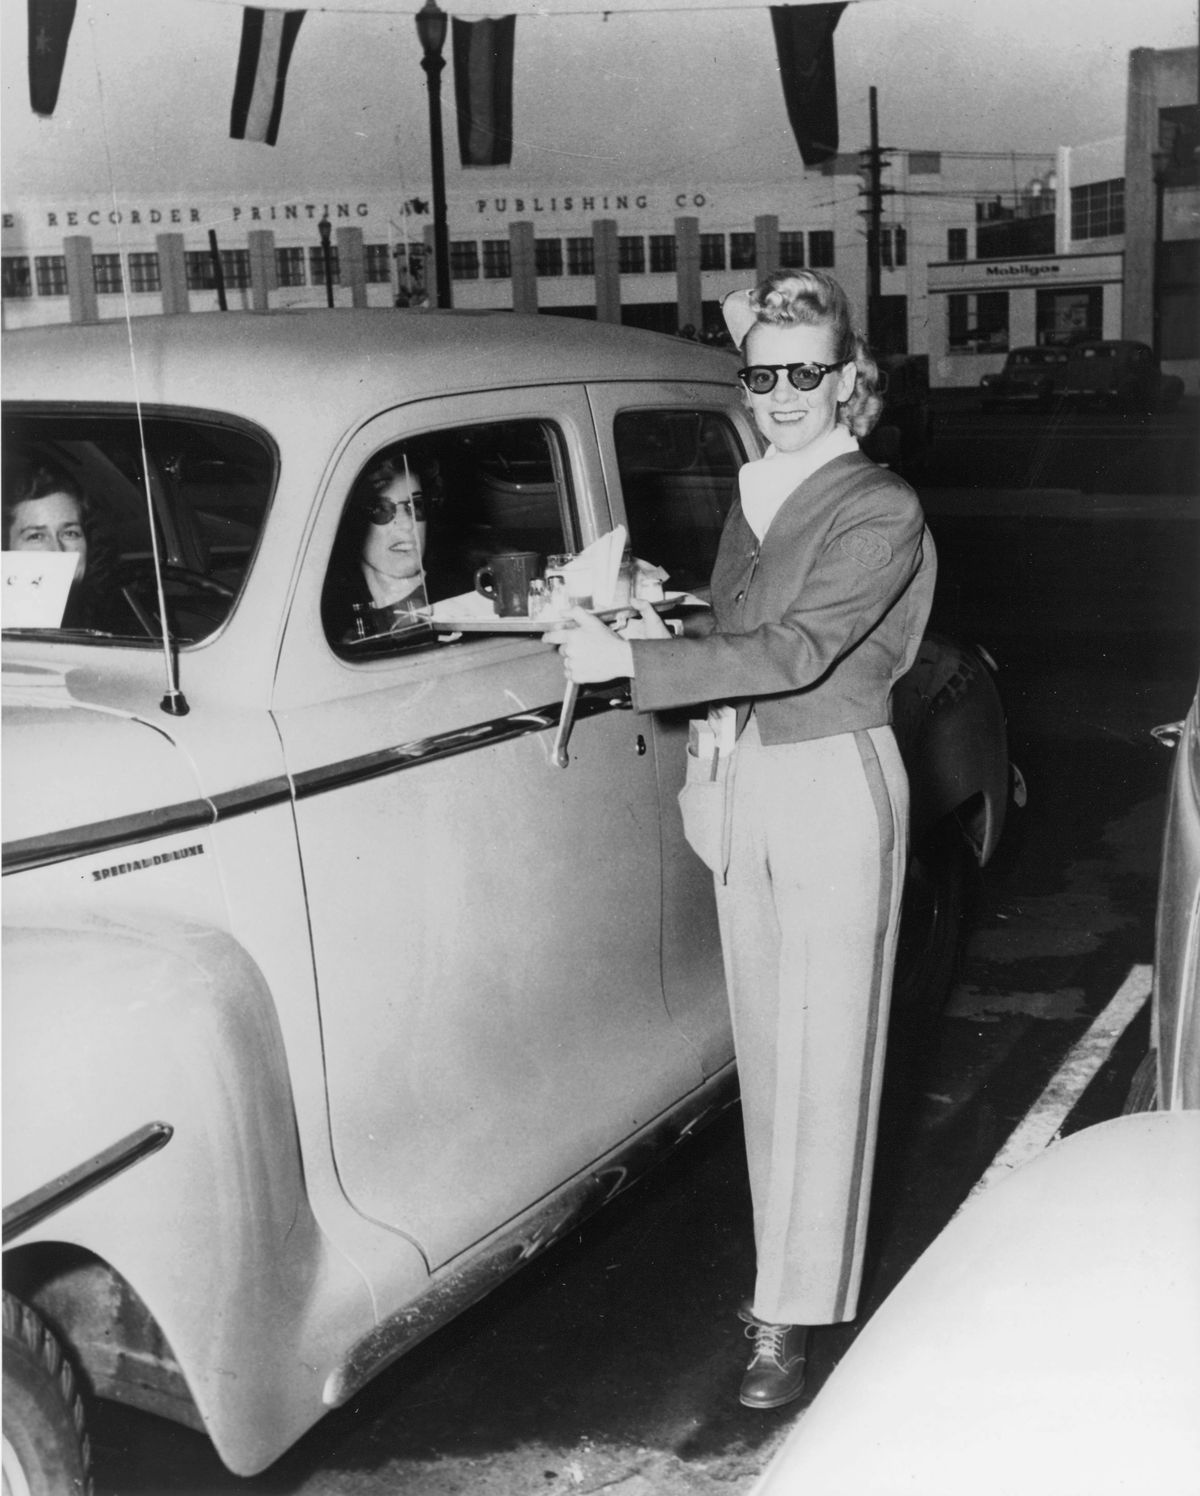 A black and white photo showing an old carhop experience where customers eat alongside their cars.